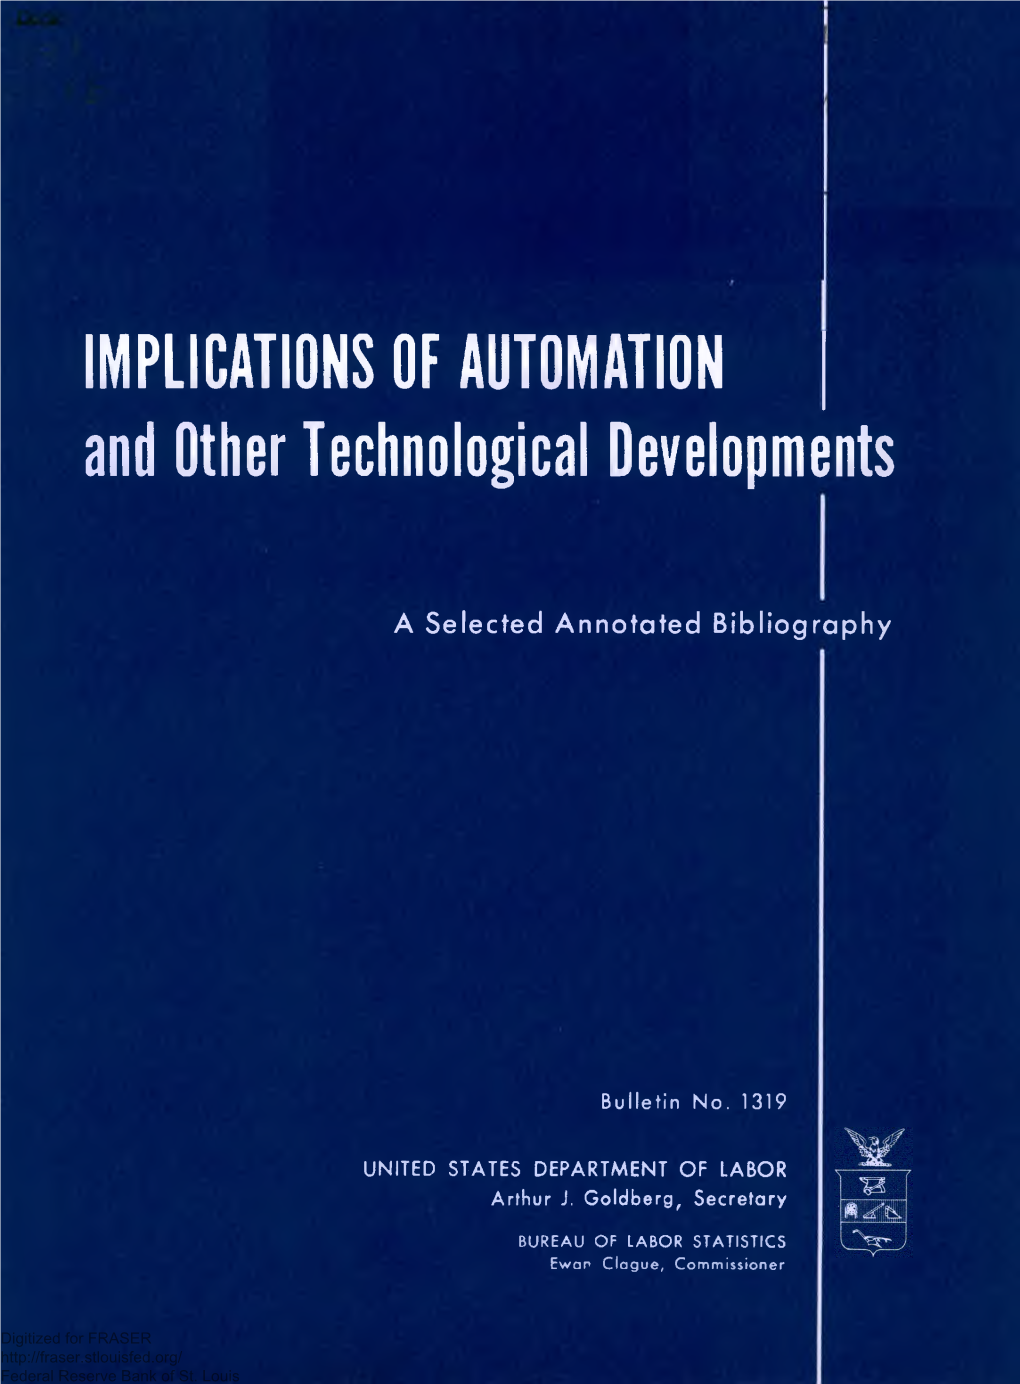 IMPLICATIONS of AUTOMATION and Other Technological Developments